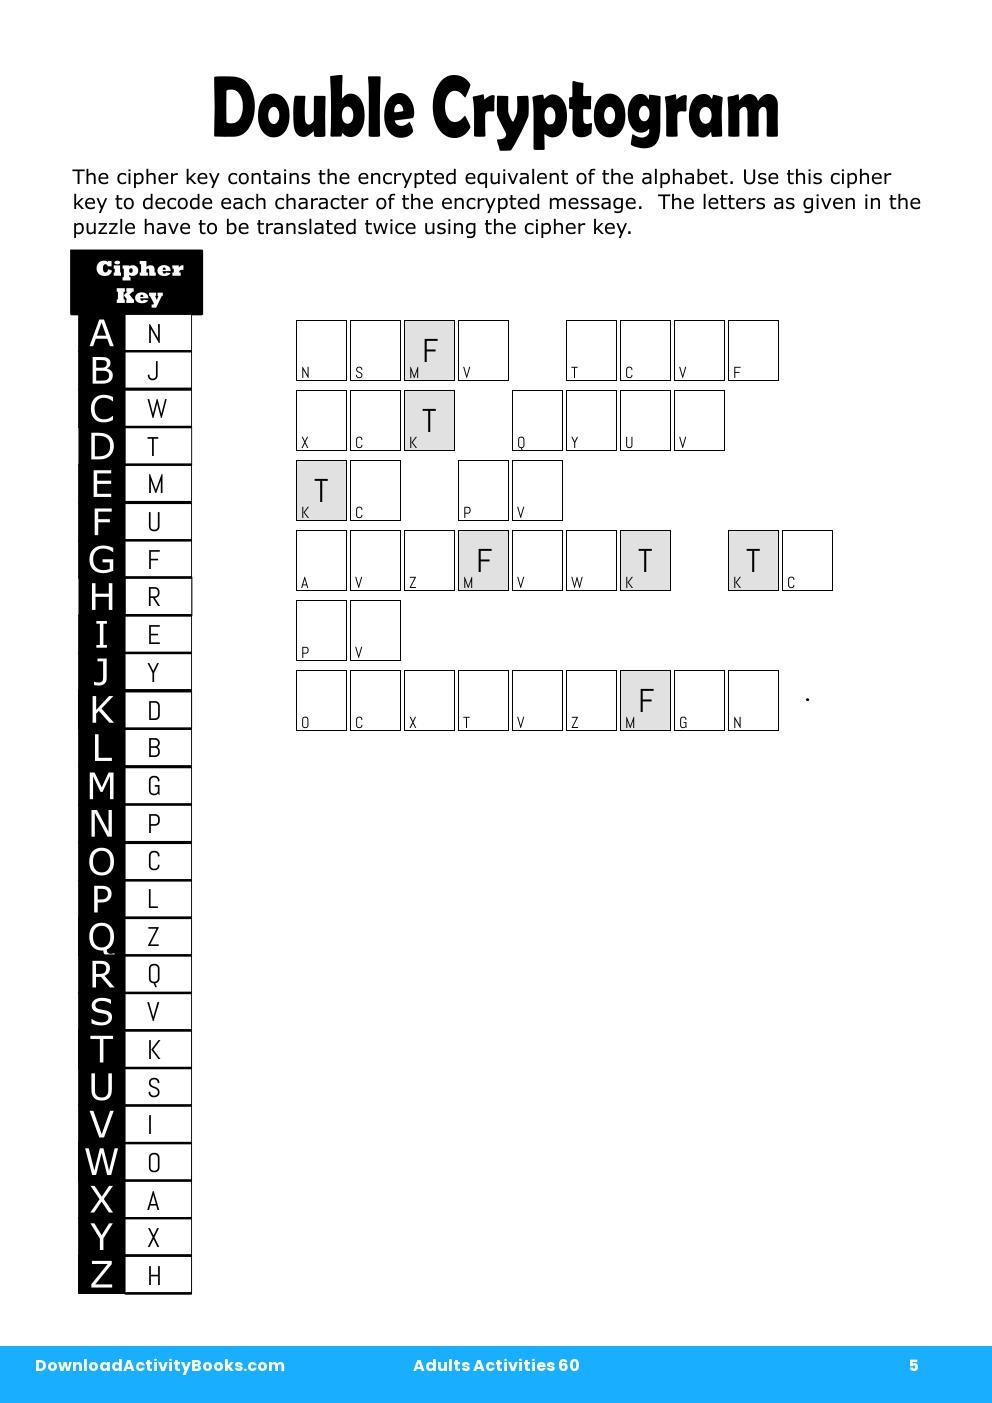 Double Cryptogram in Adults Activities 60